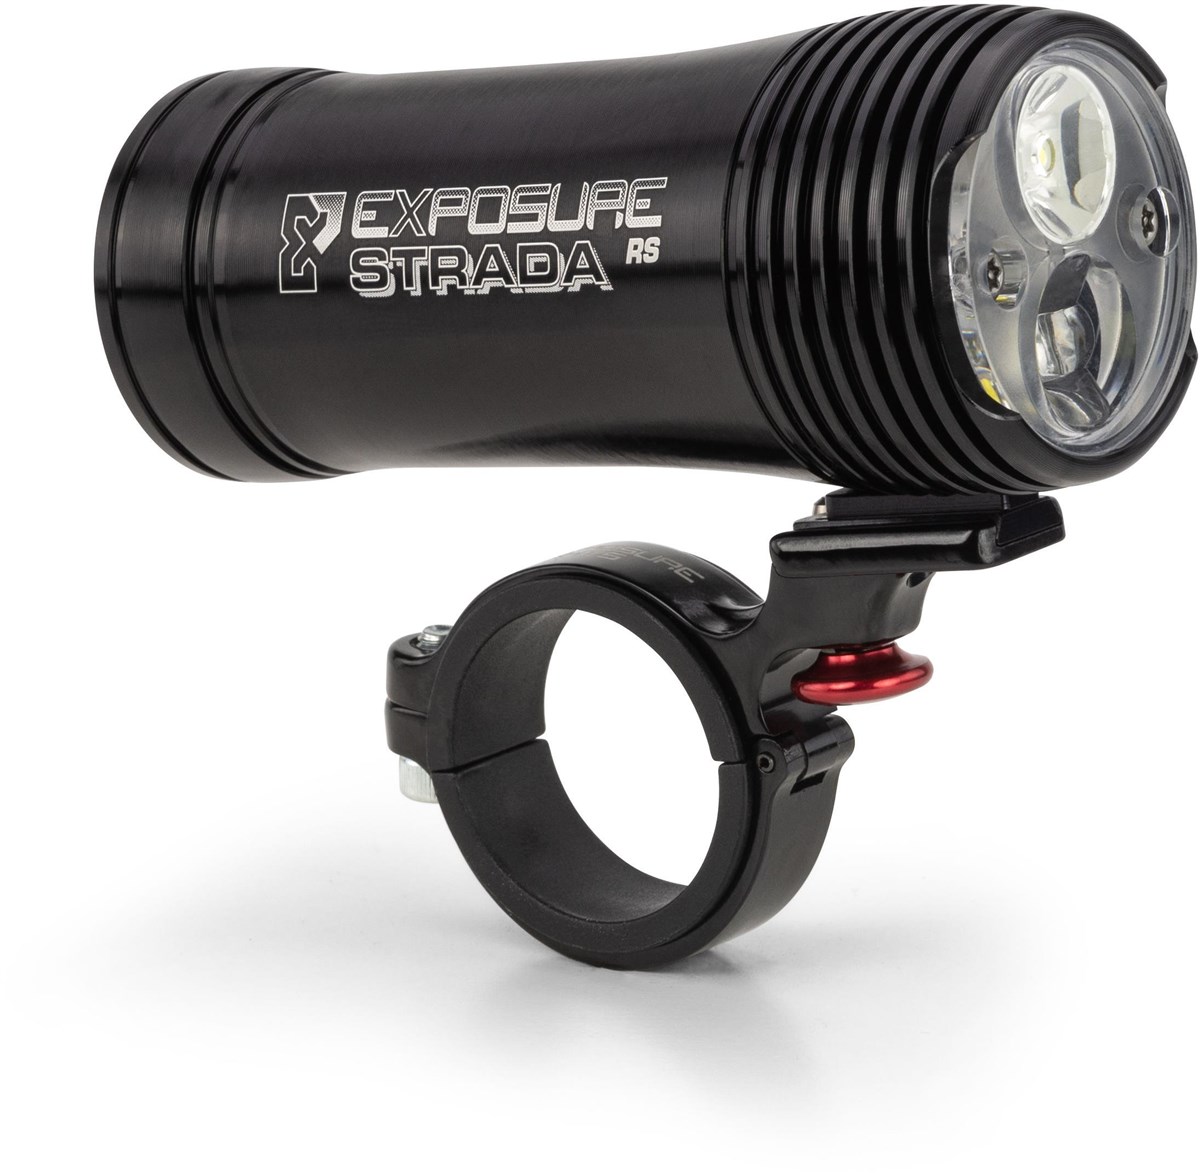 Exposure Strada RS Mk9 Front Light product image